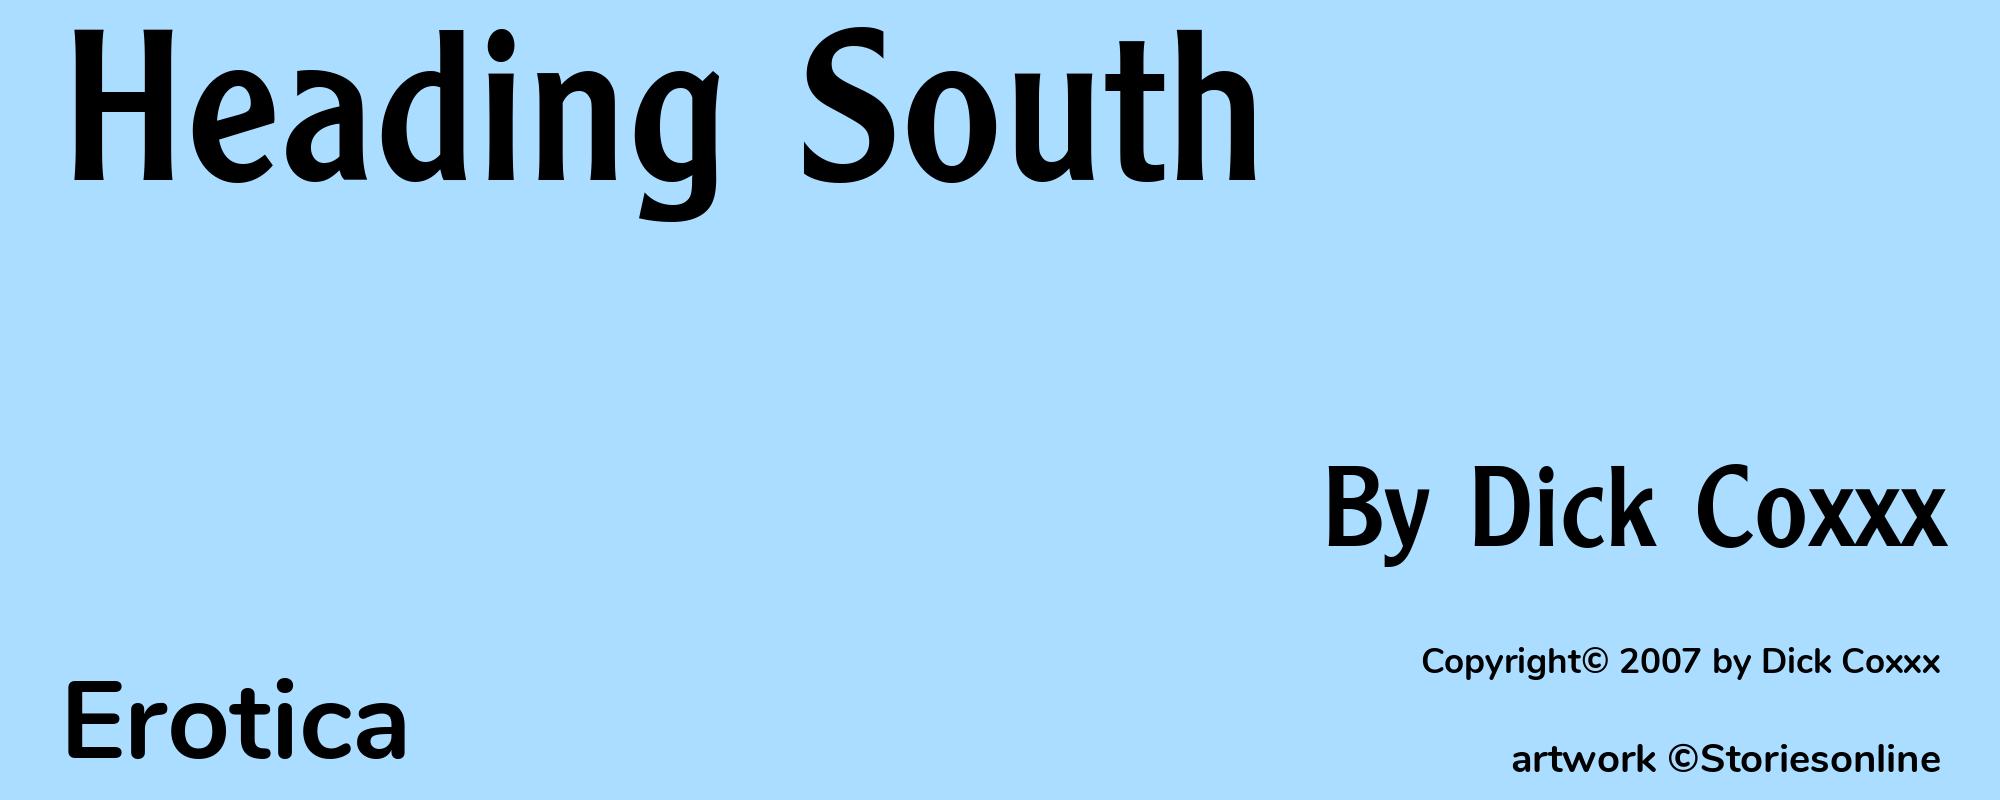 Heading South - Cover